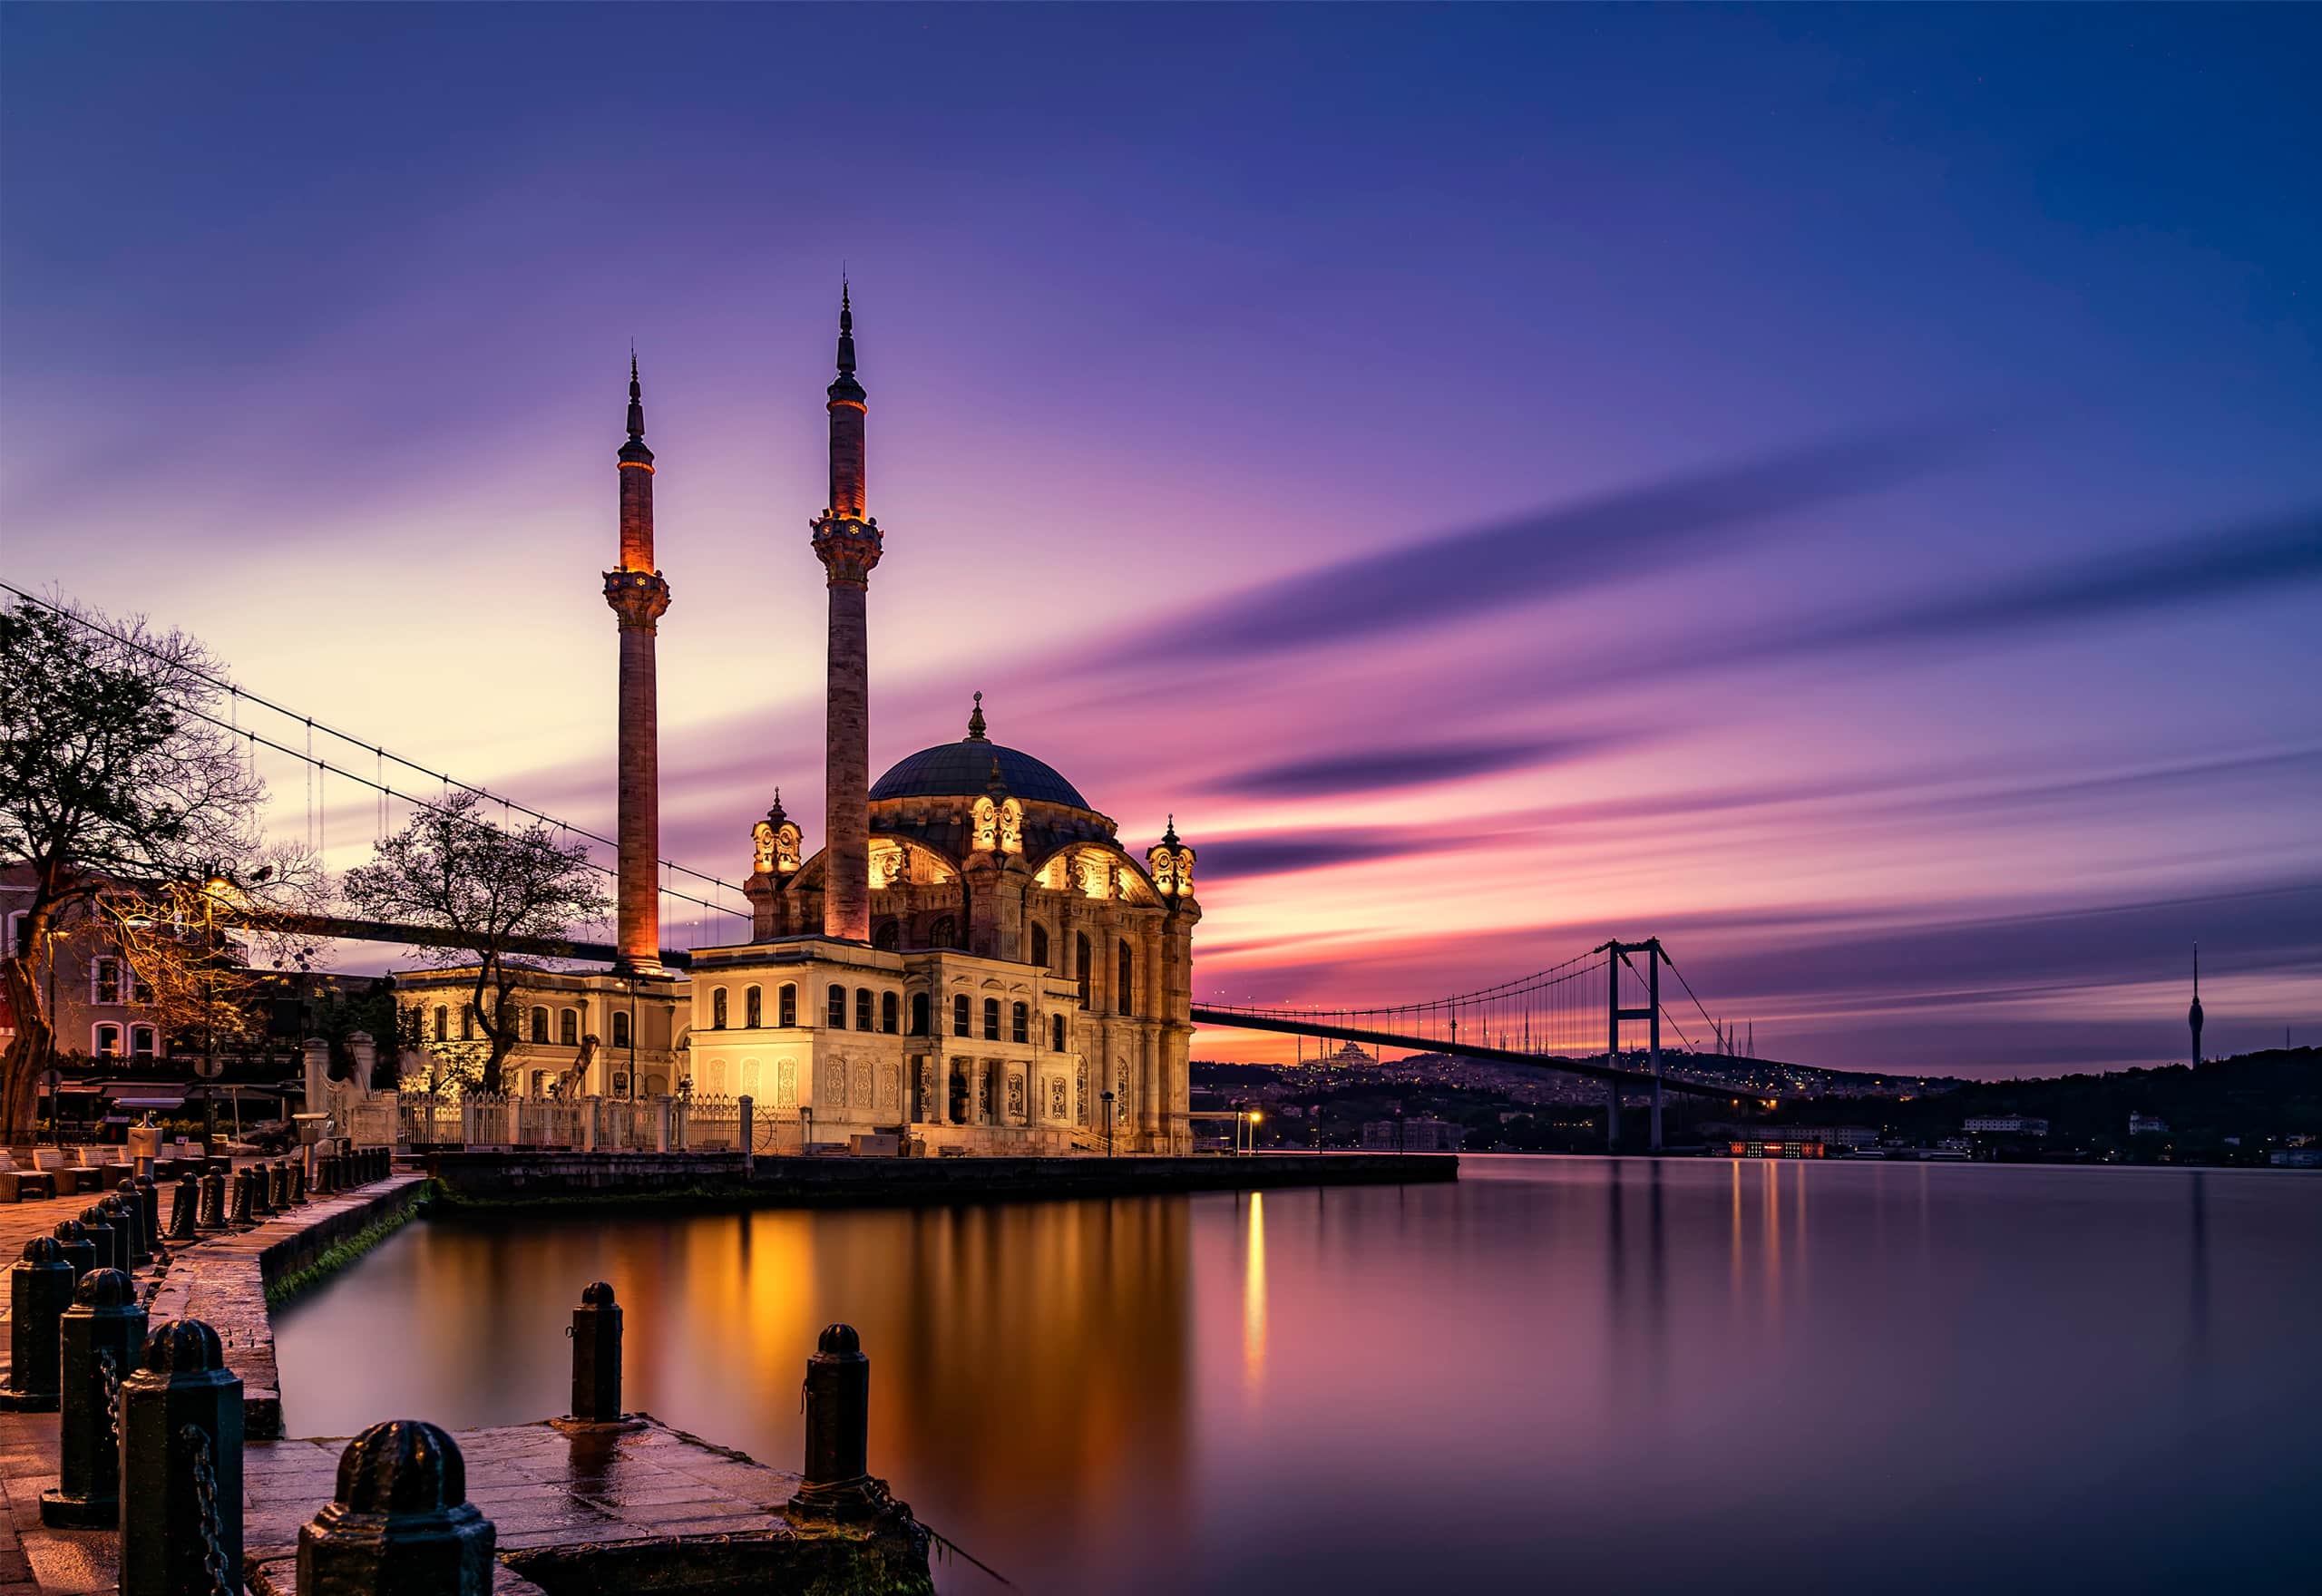 Finance , Accounting and Budgeting Courses in Istanbul